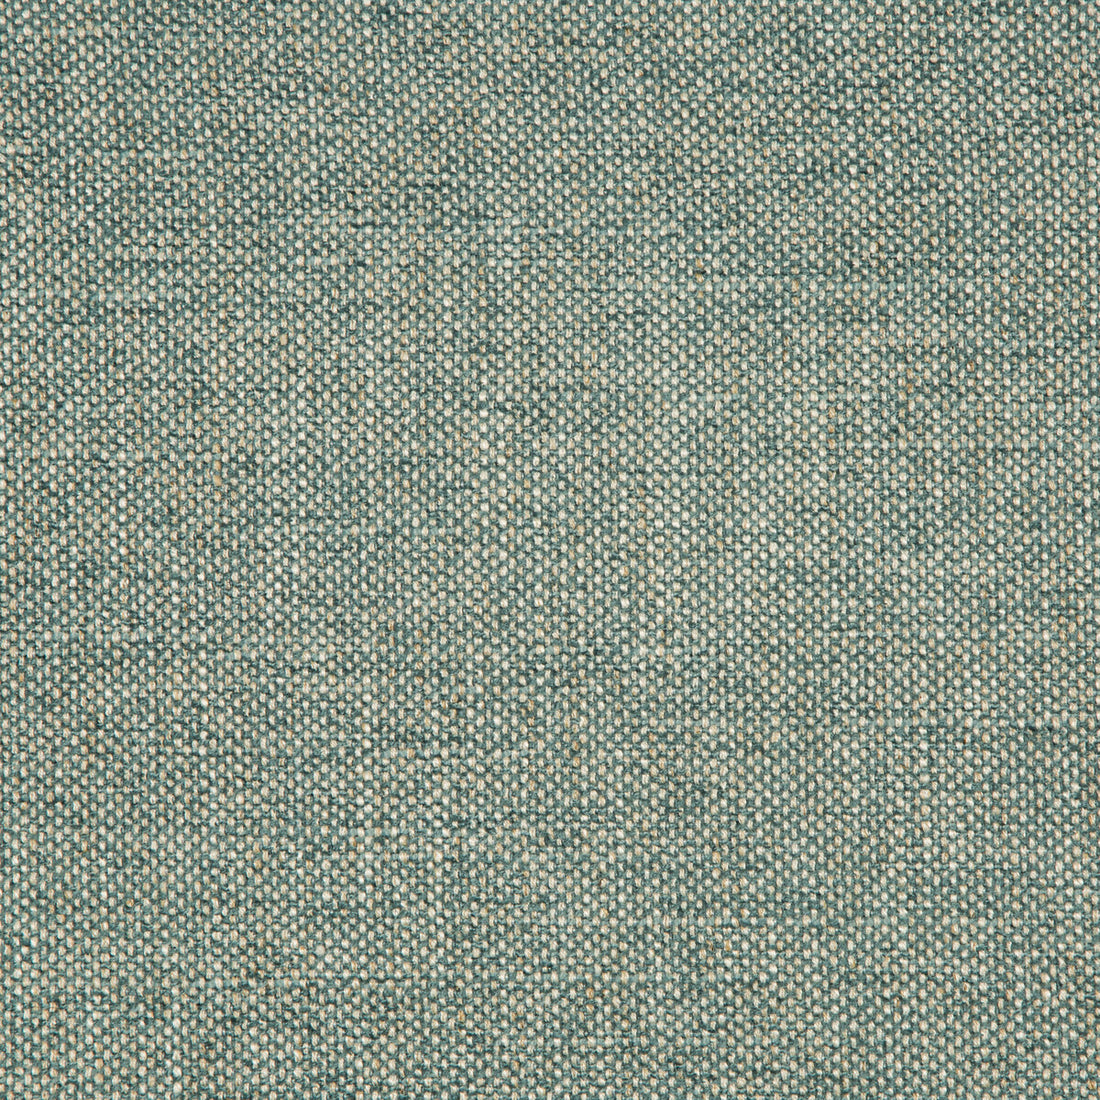 Kravet Smart fabric in 35989-135 color - pattern 35989.135.0 - by Kravet Smart in the Performance Crypton Home collection